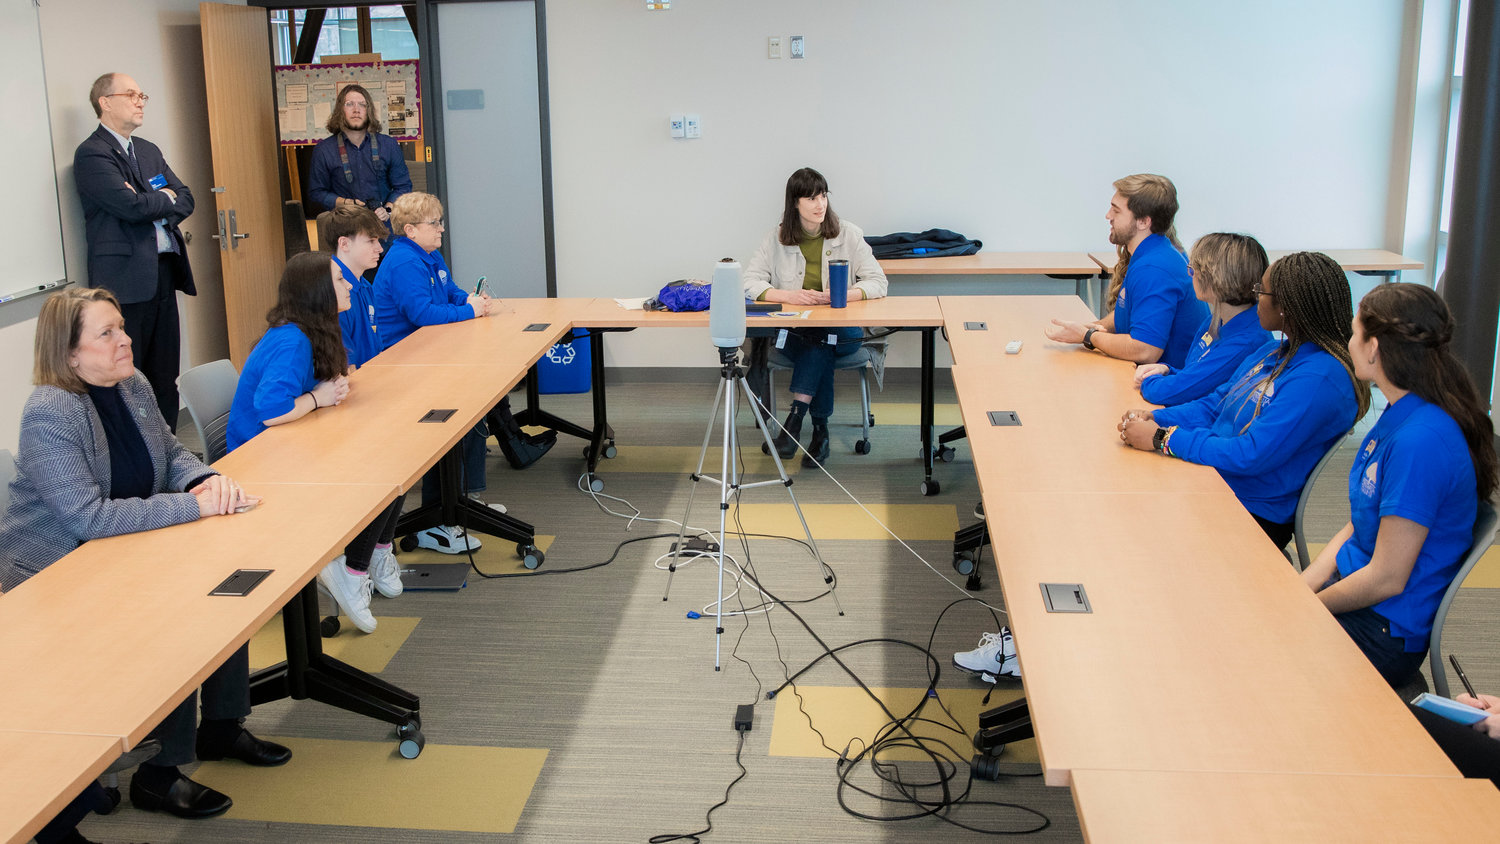 Marie Gluesenkamp Perez talks to students at Centralia College before a tour of the campus on Friday.